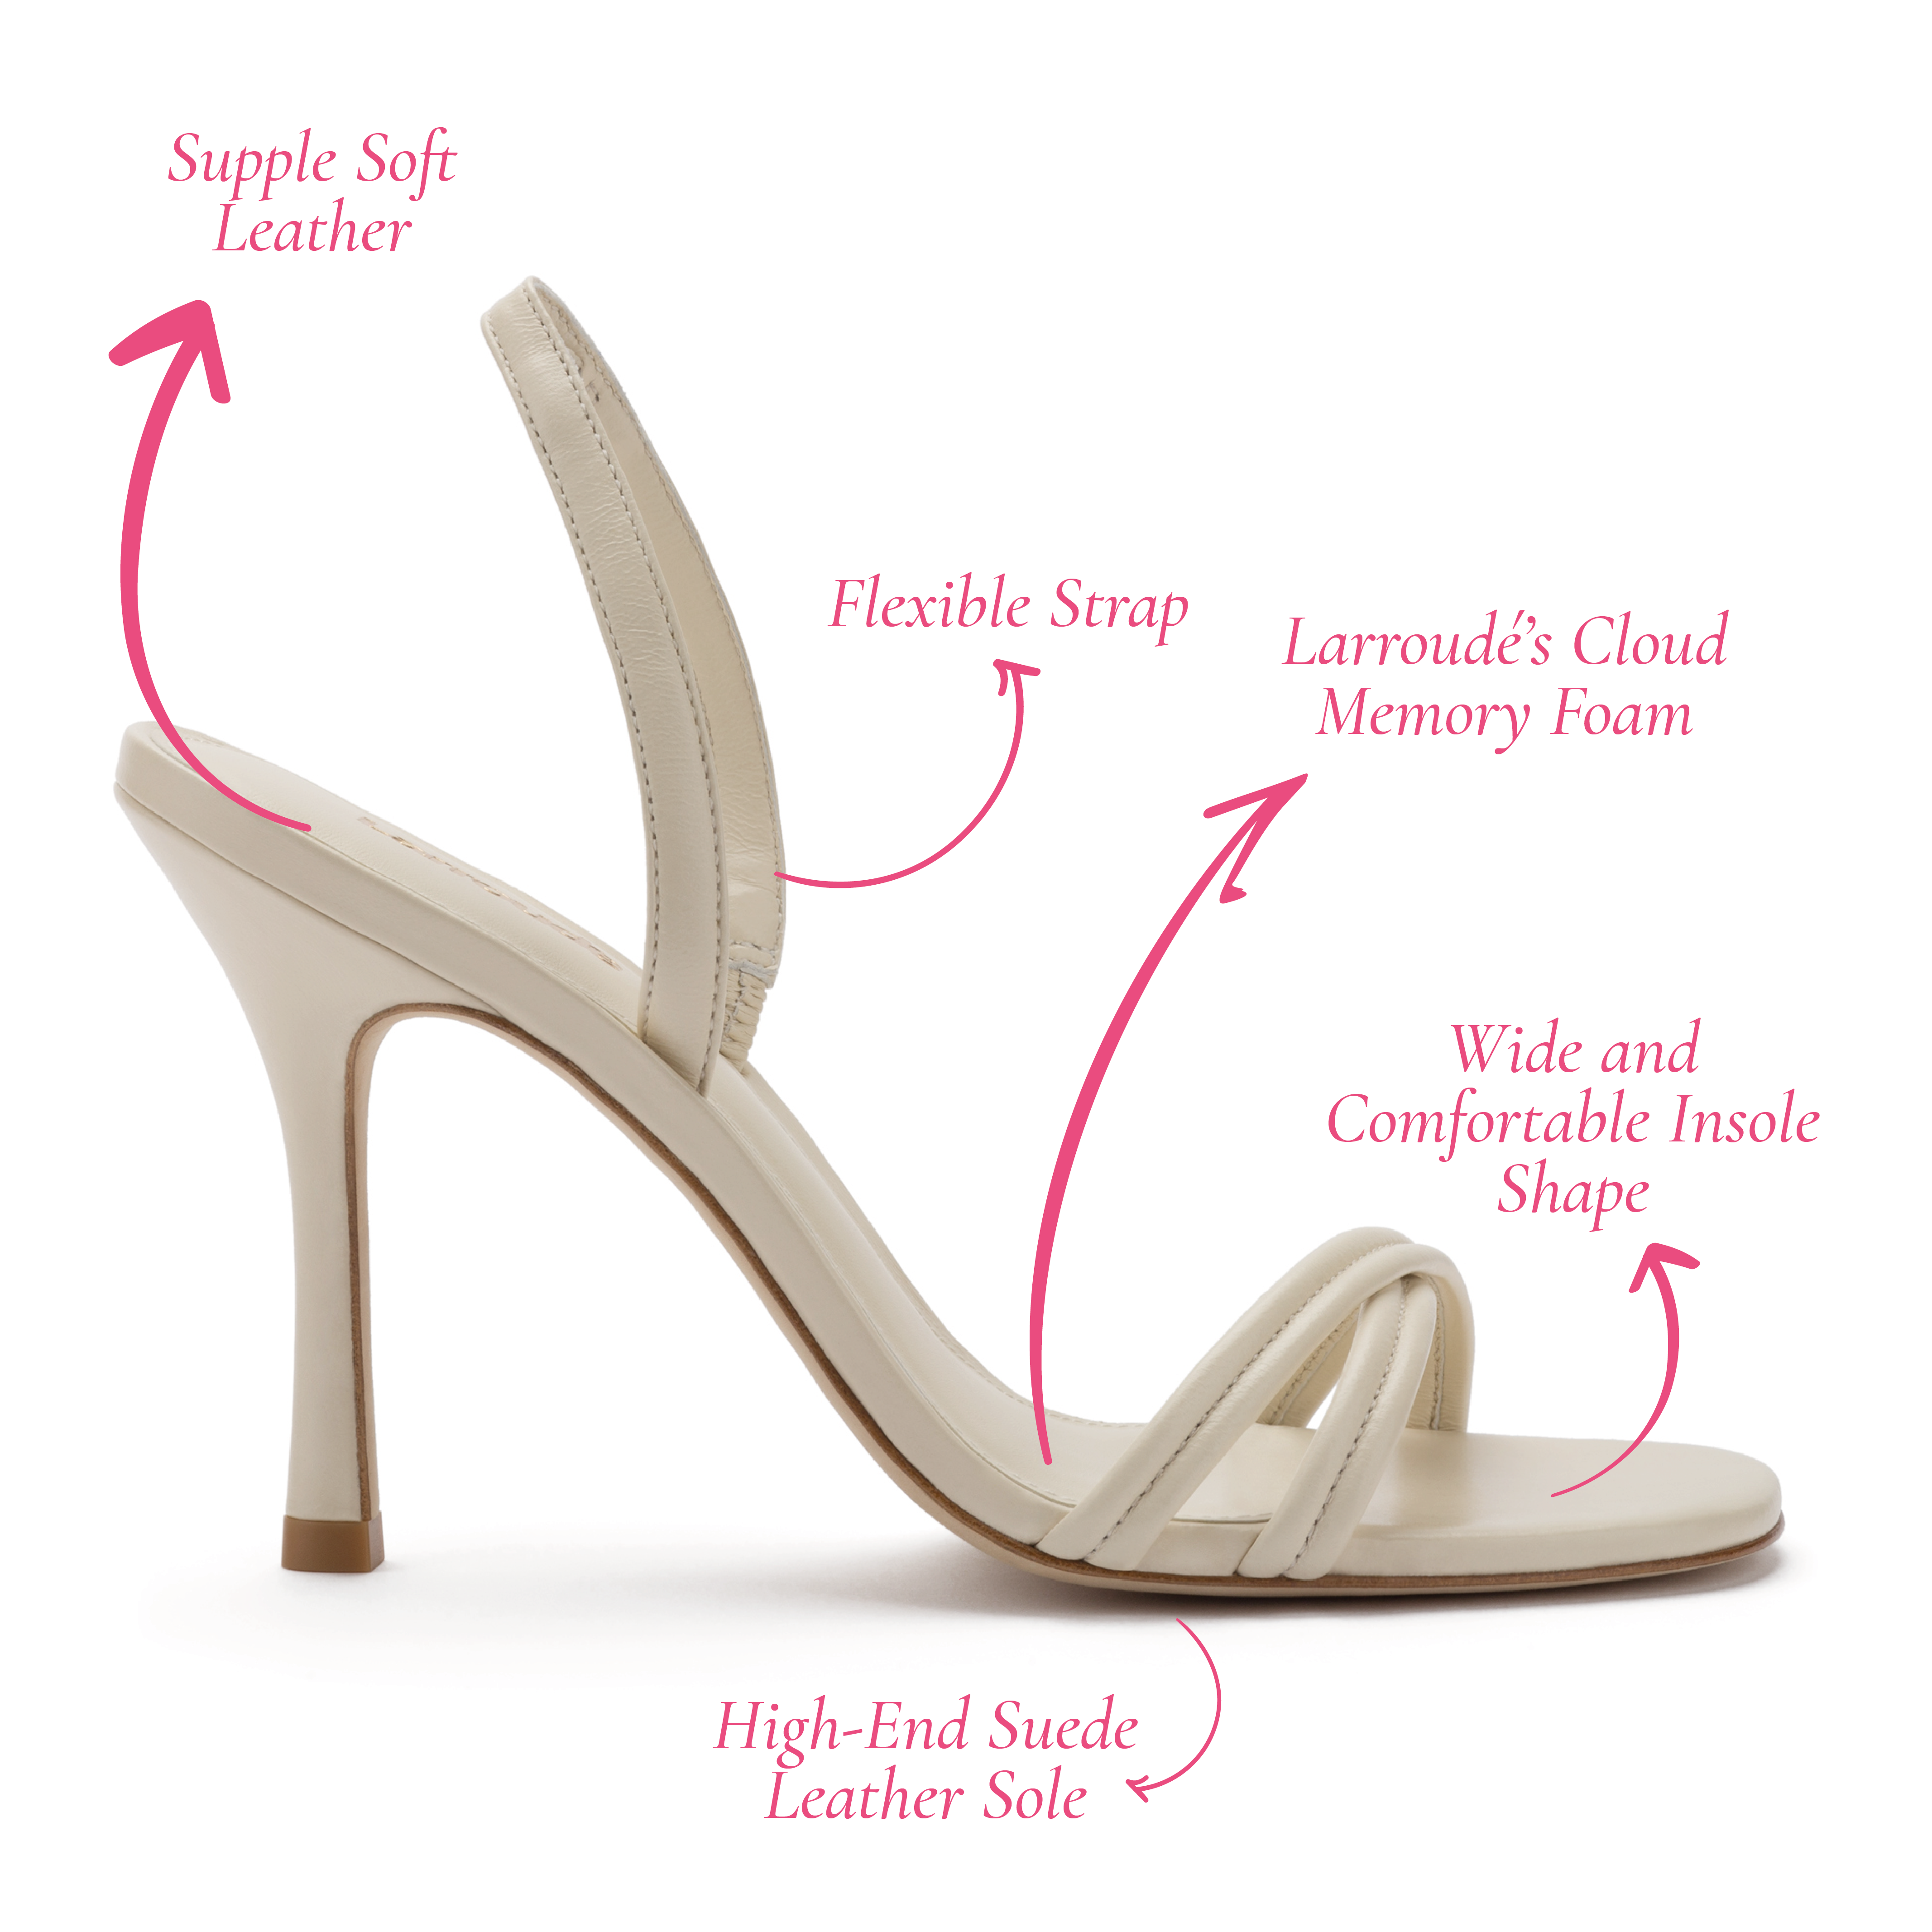 Annie Sandal In Ivory Leather